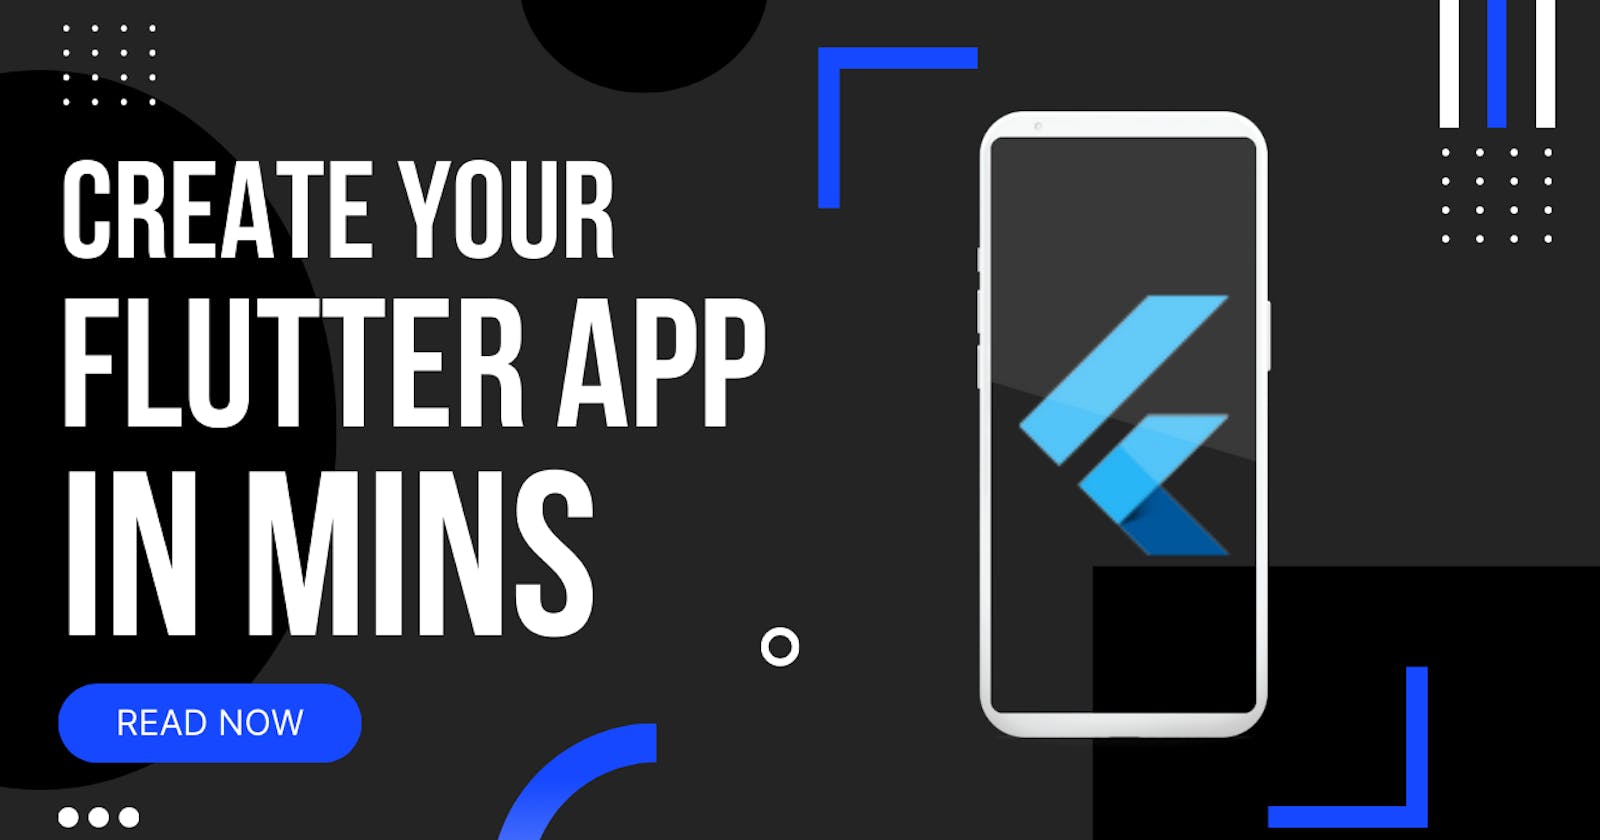 How to create your first Flutter app?